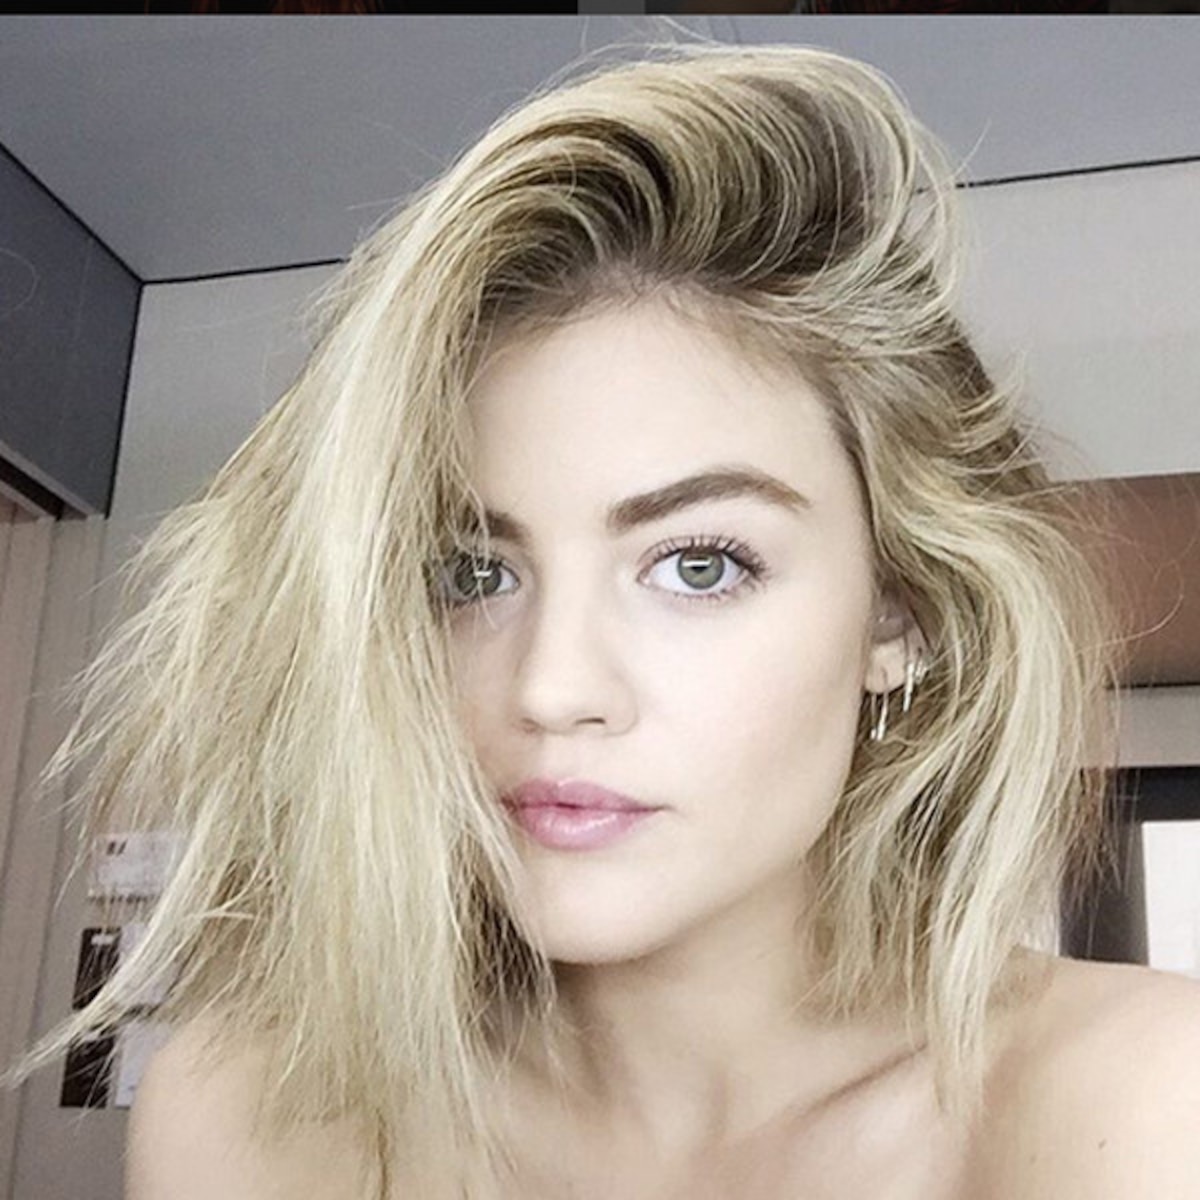 Best of Lucy hale toppless photos